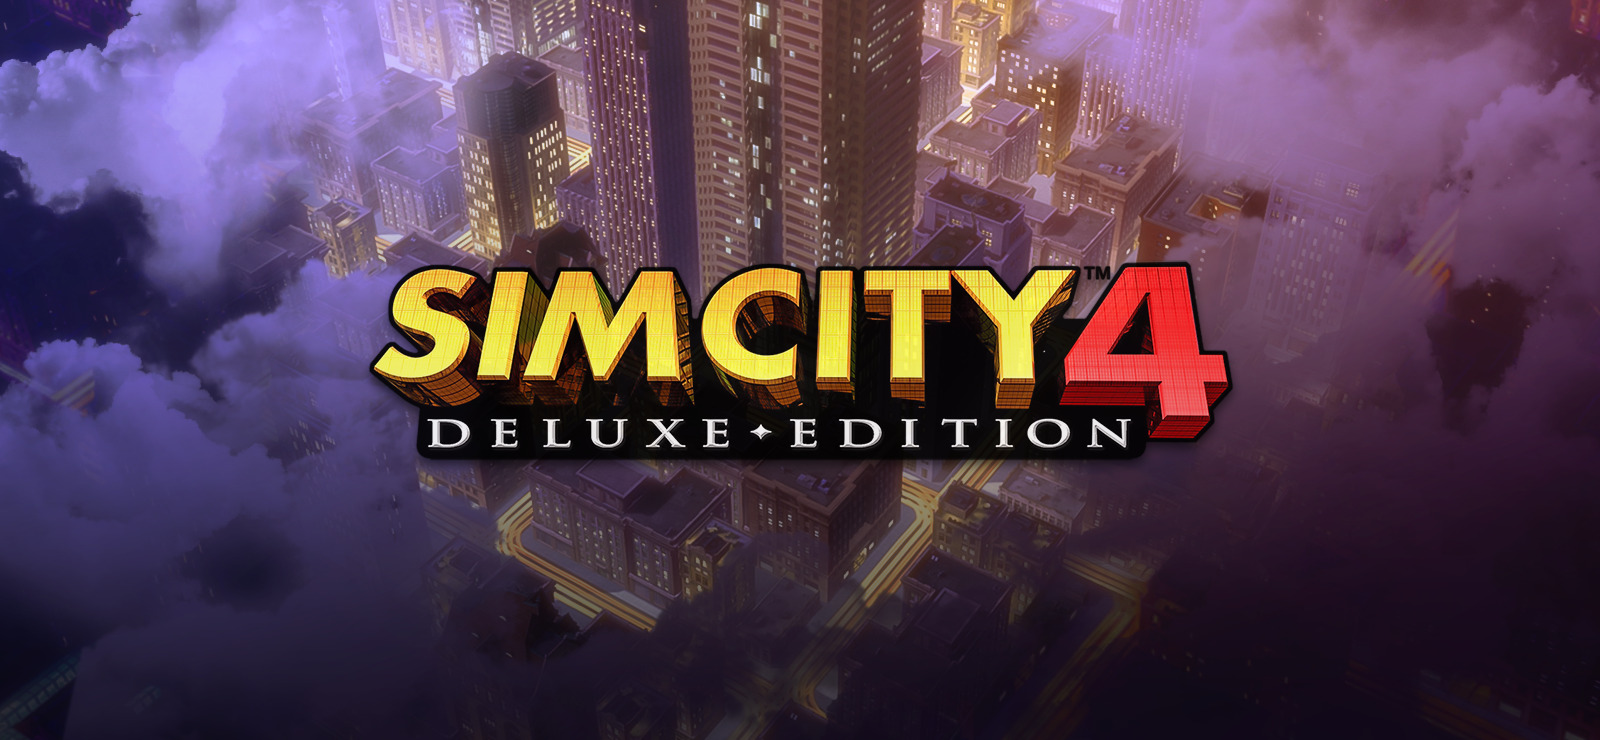 Simcity 4 Deluxe Edition Free Download V1 1 641 Gog Unlocked